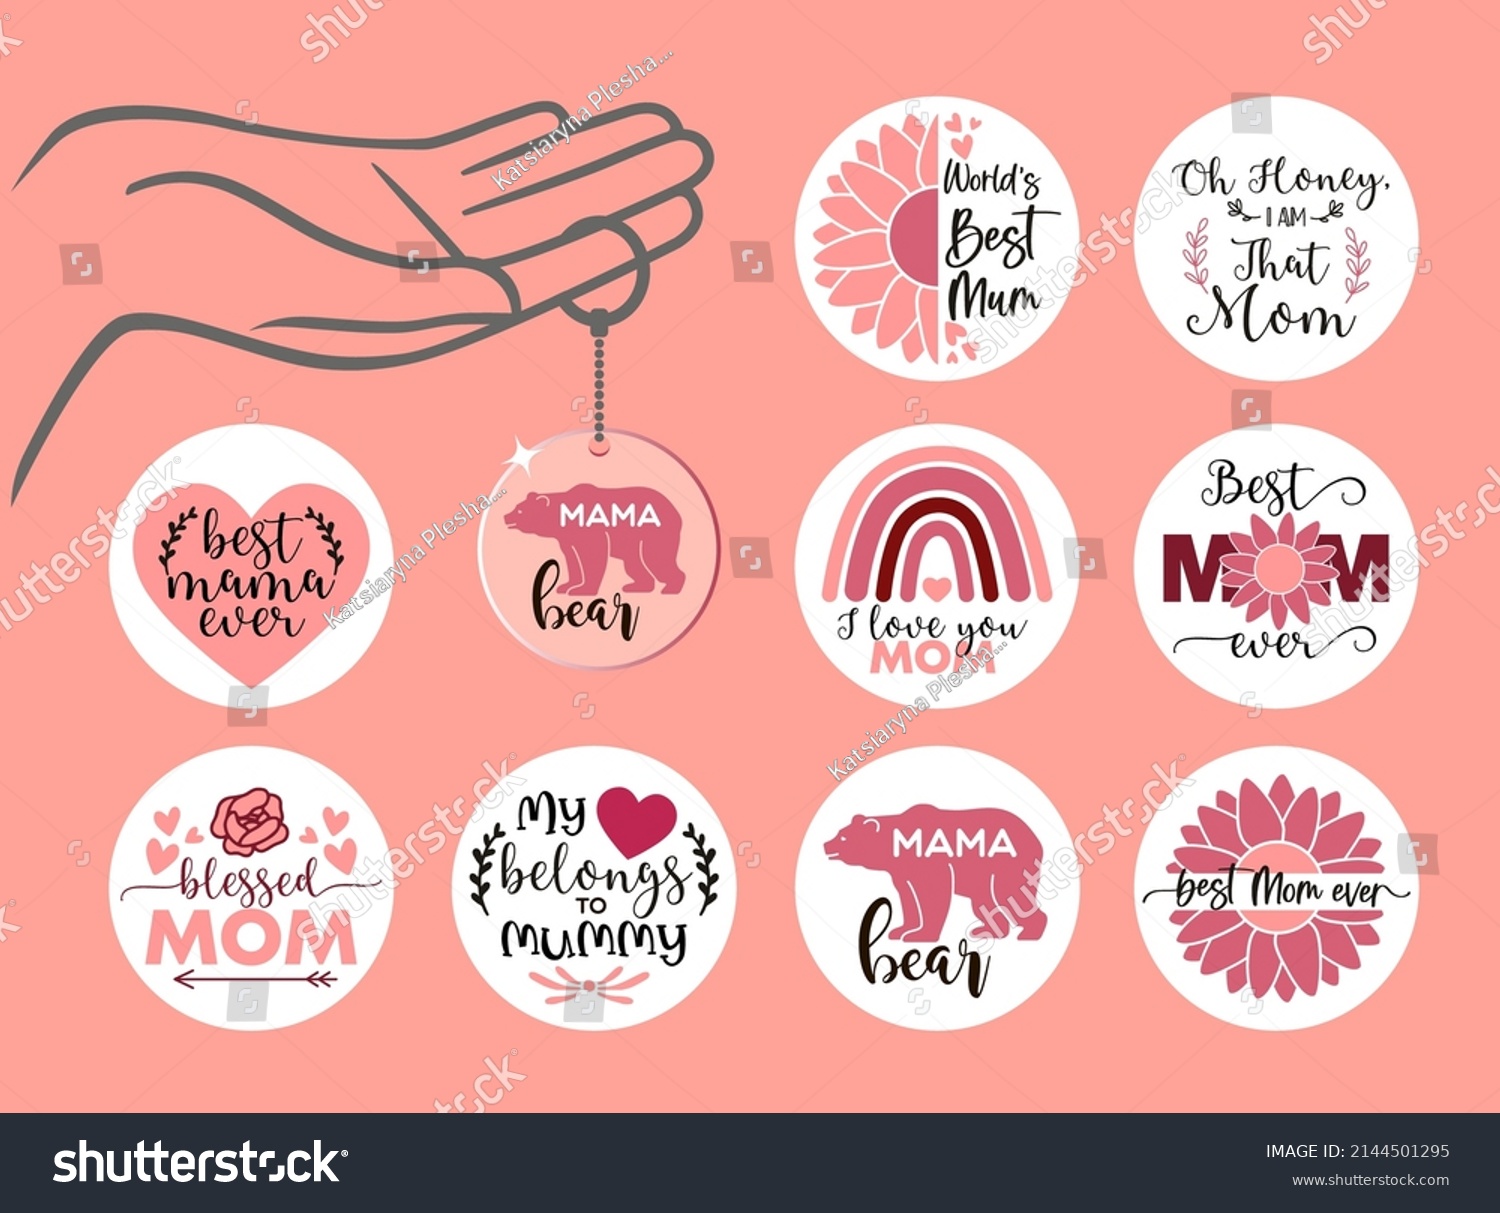 SVG of Mother s Day Keychain Design for Round Acrylic Keychain. Best Mom Ever, Mama Bear and others svg